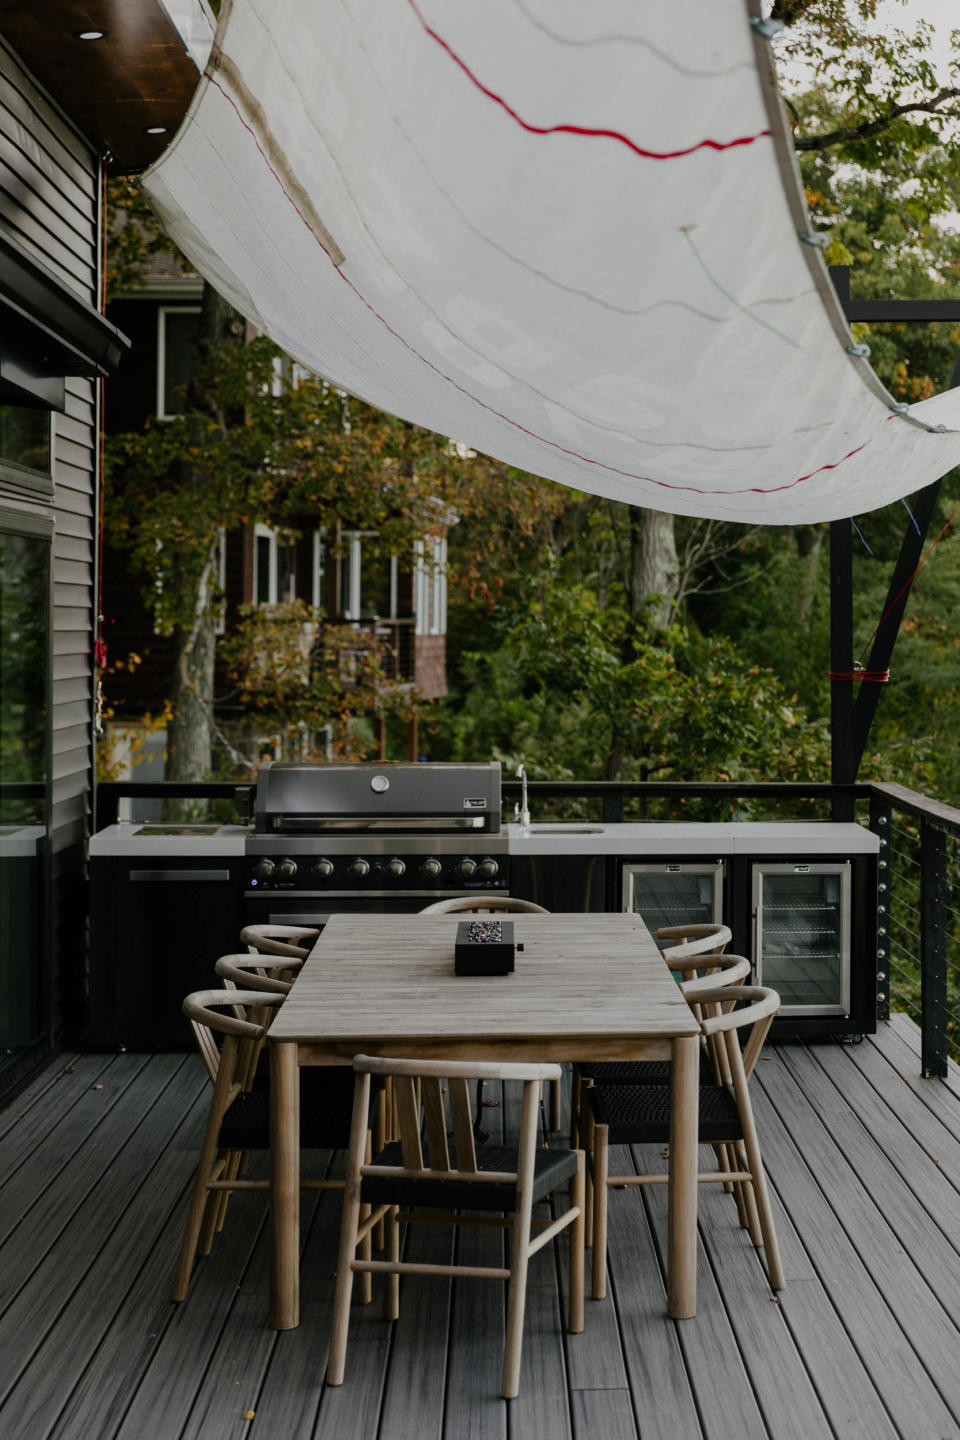 Fabric from an actual vintage sail creates shade for the outdoor dining area.